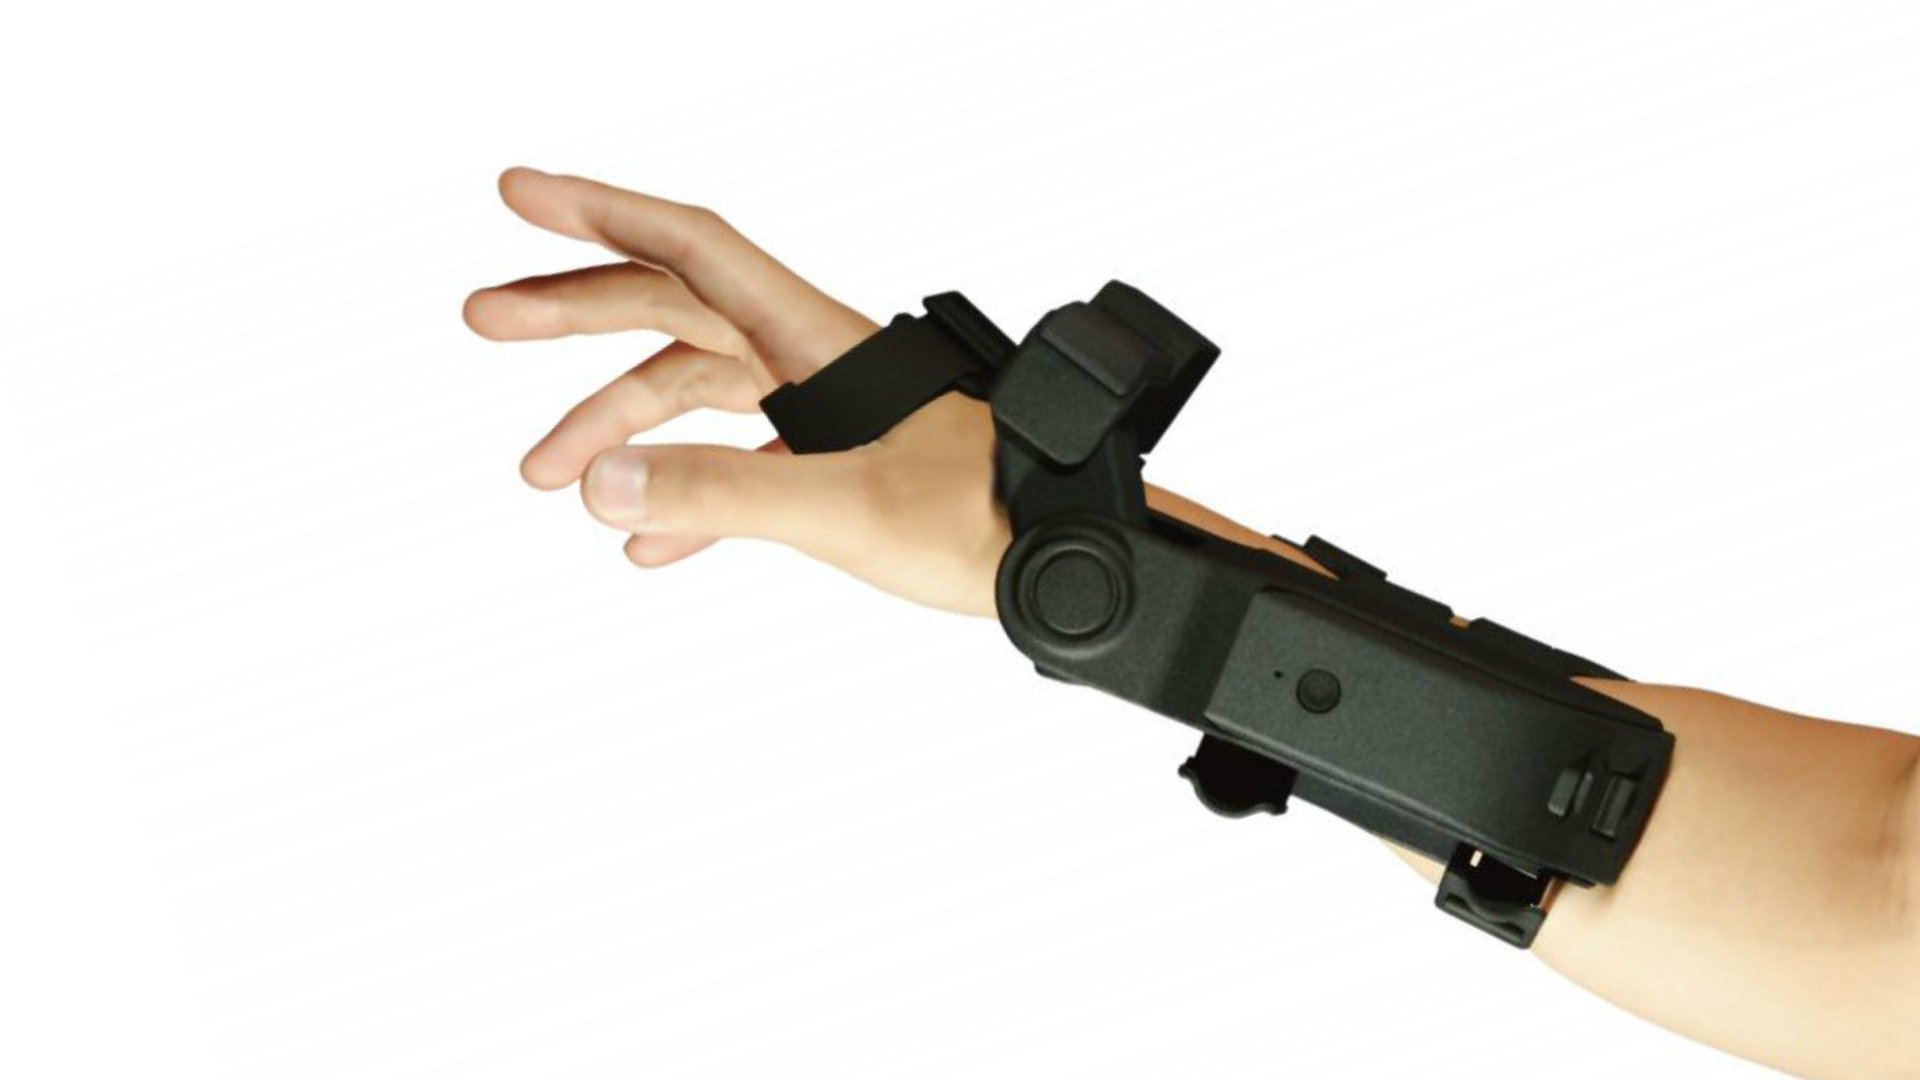 EXOS Wrist: A Wearable Haptic Device for VR and AR